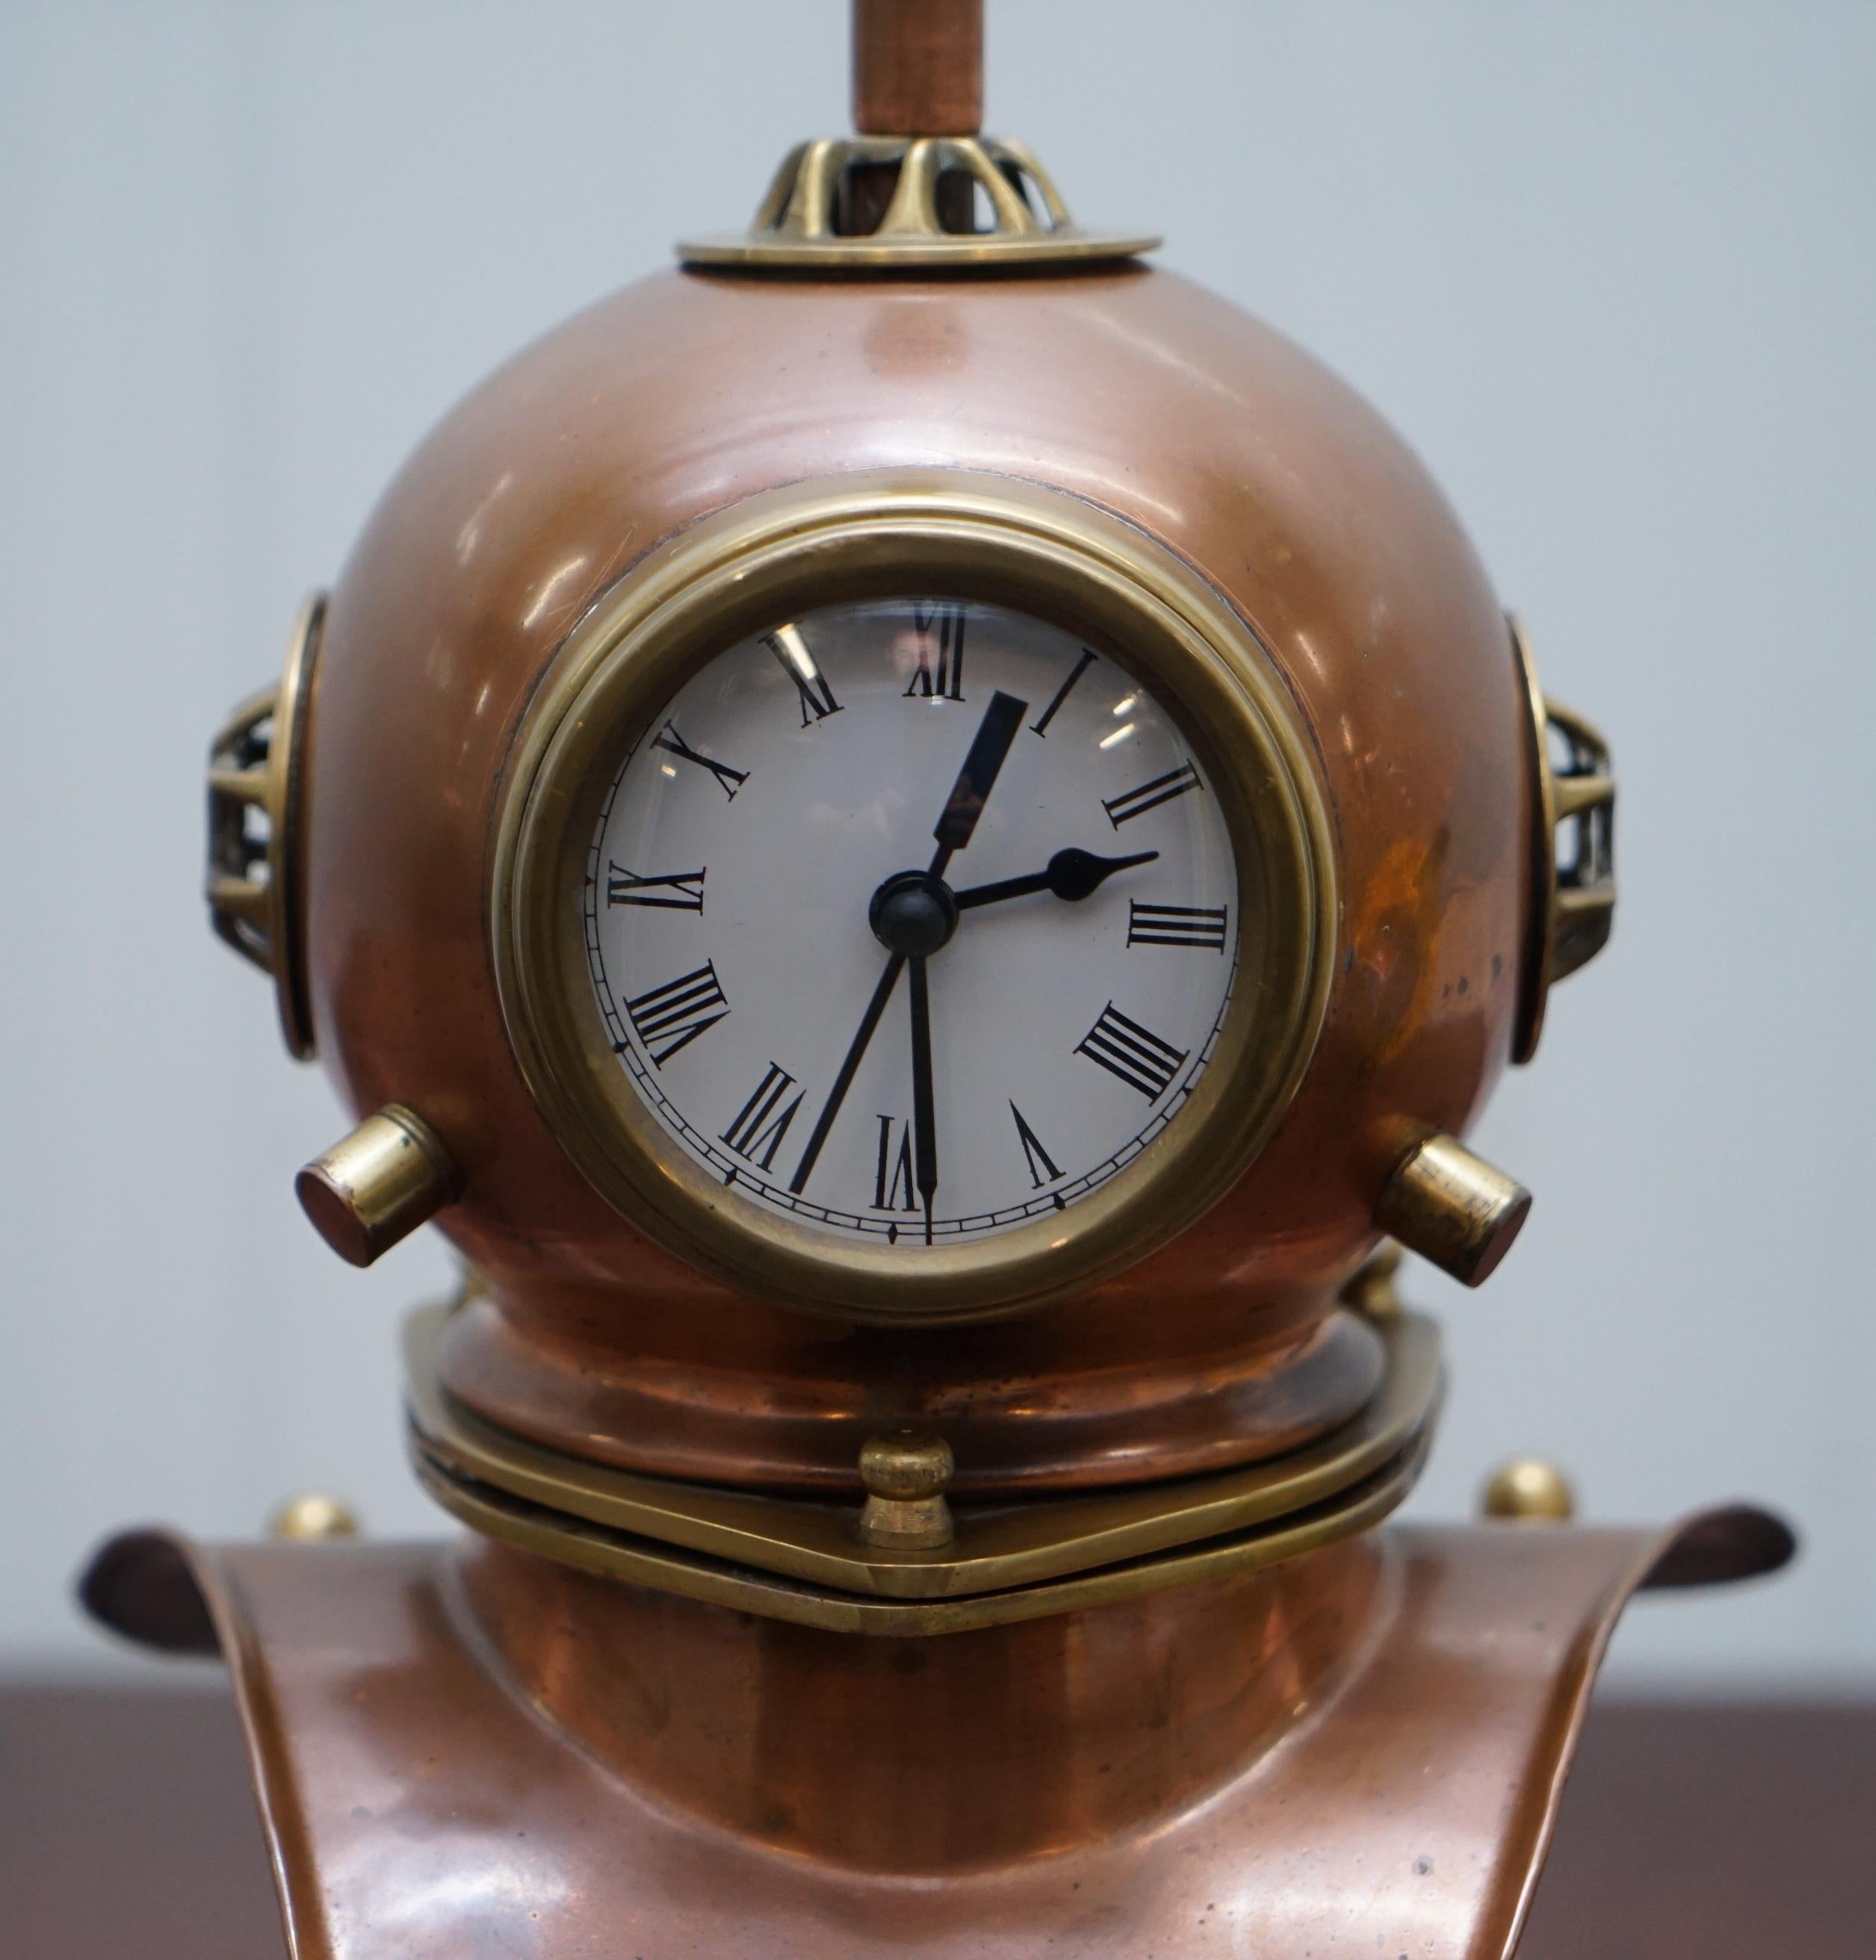 Stunning Vintage Small Divers Copper and Brass Helmet with Clock and Lamp Table 1